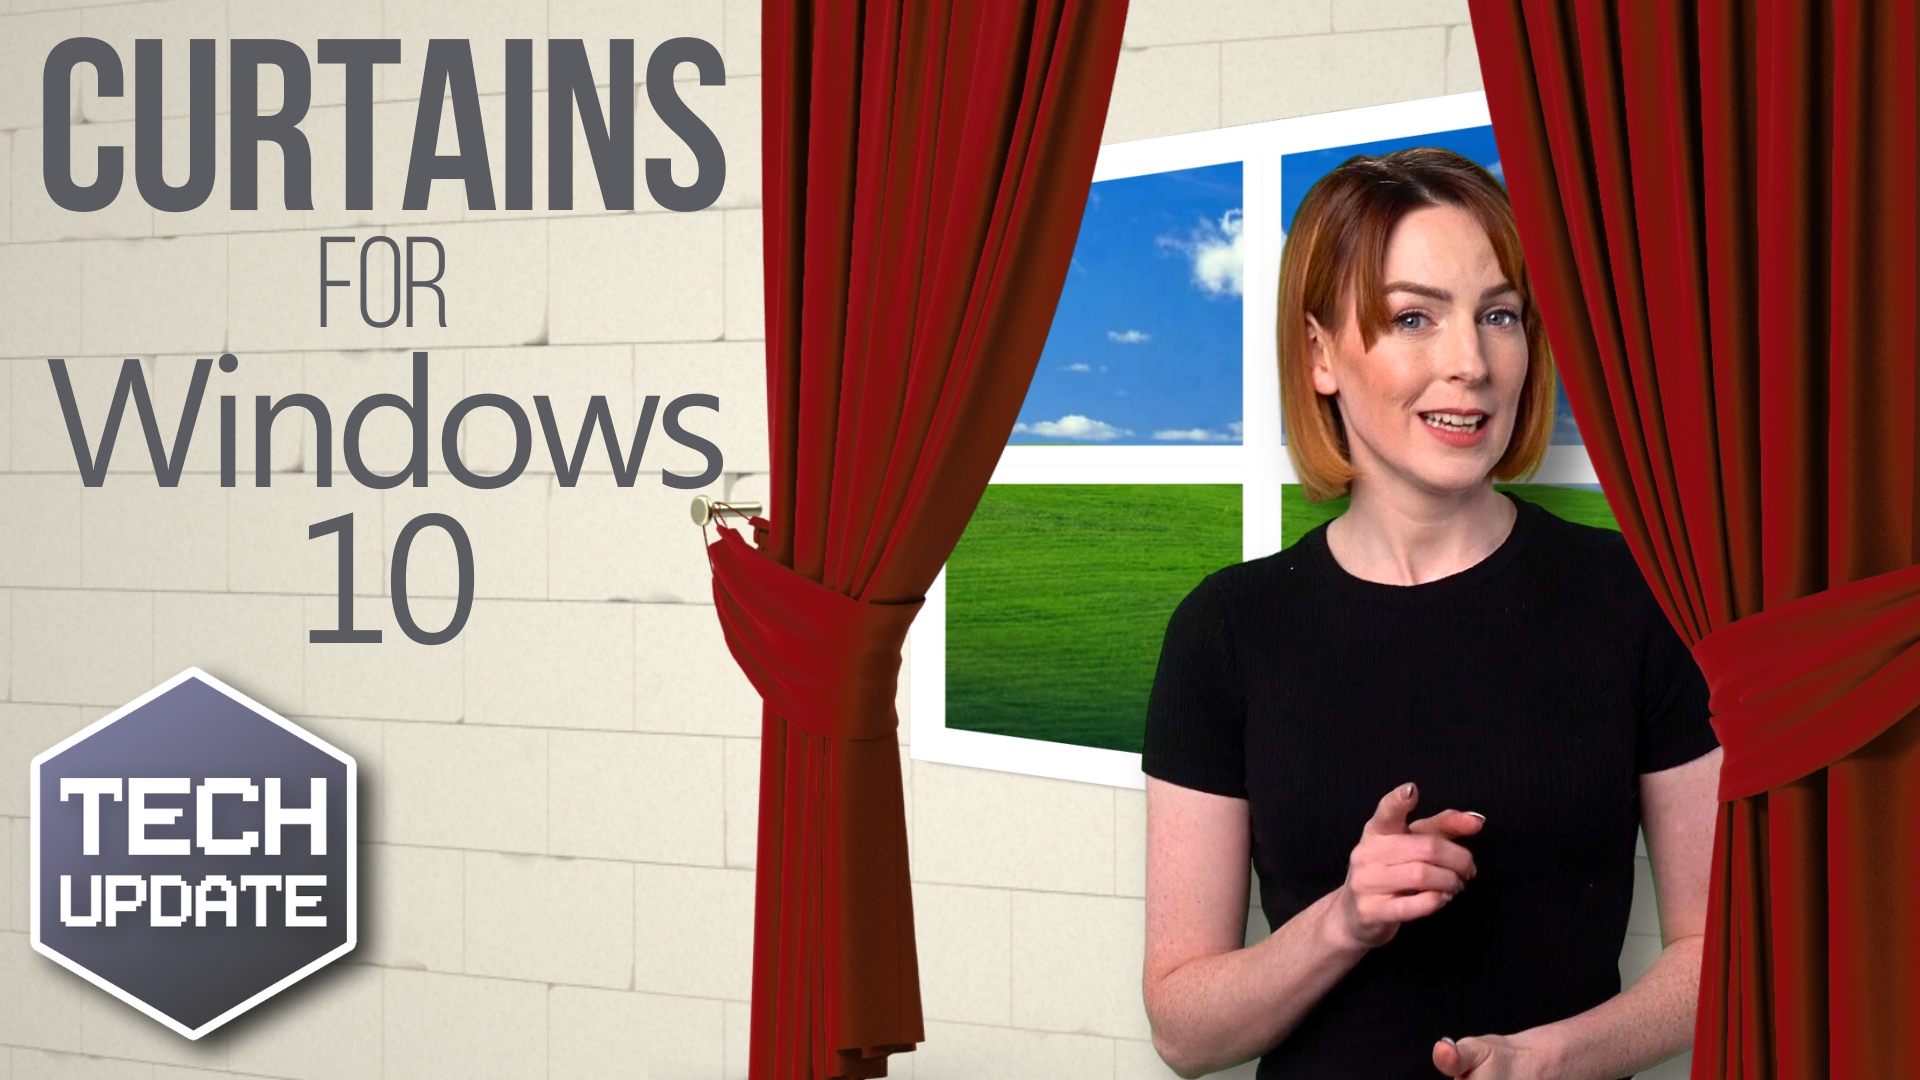 The final curtain call for Windows 10: What you need to know